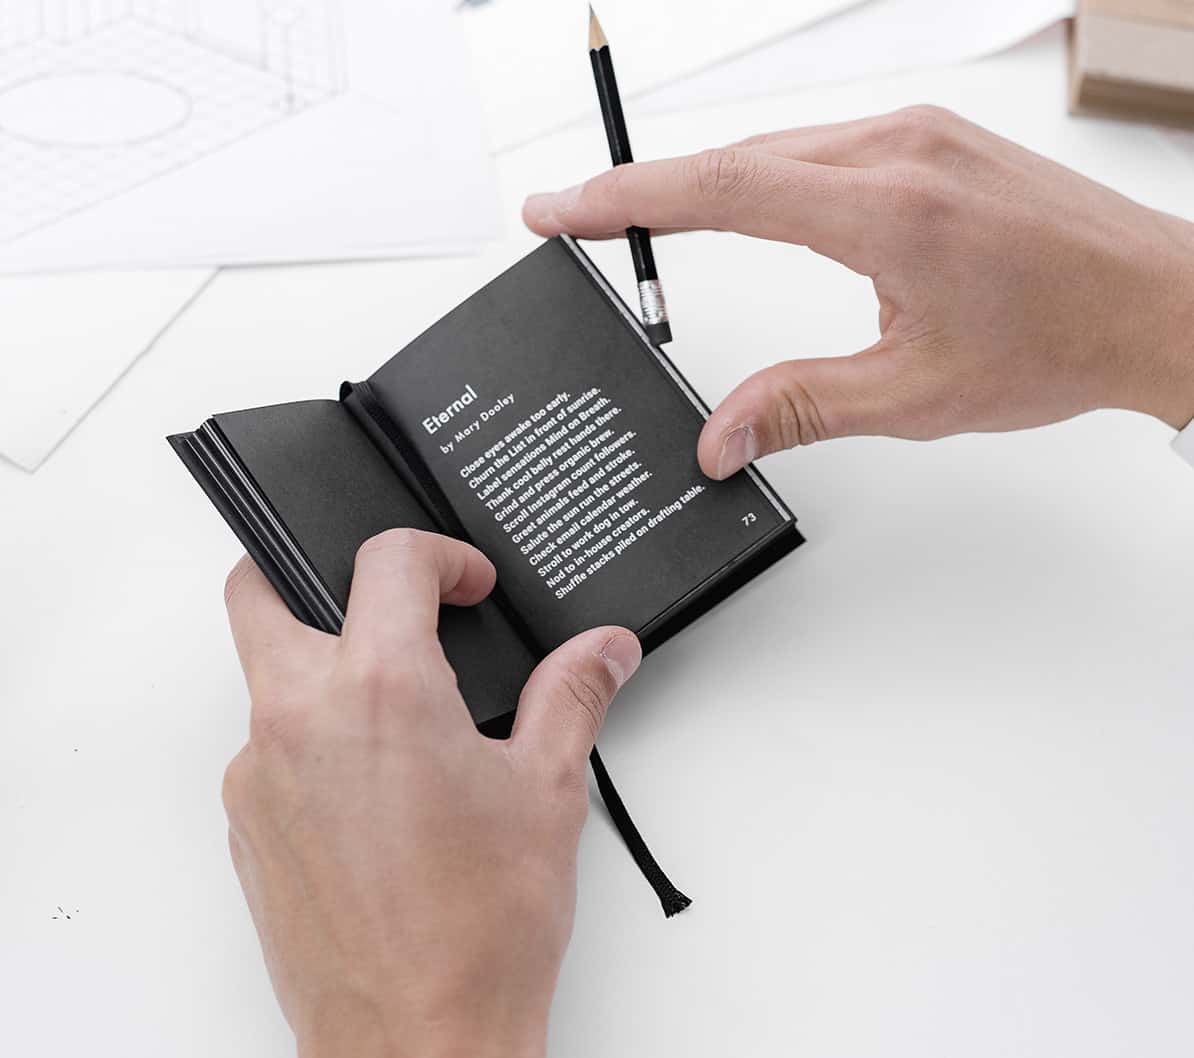 Poems of a Modern-Day Architect Notebook